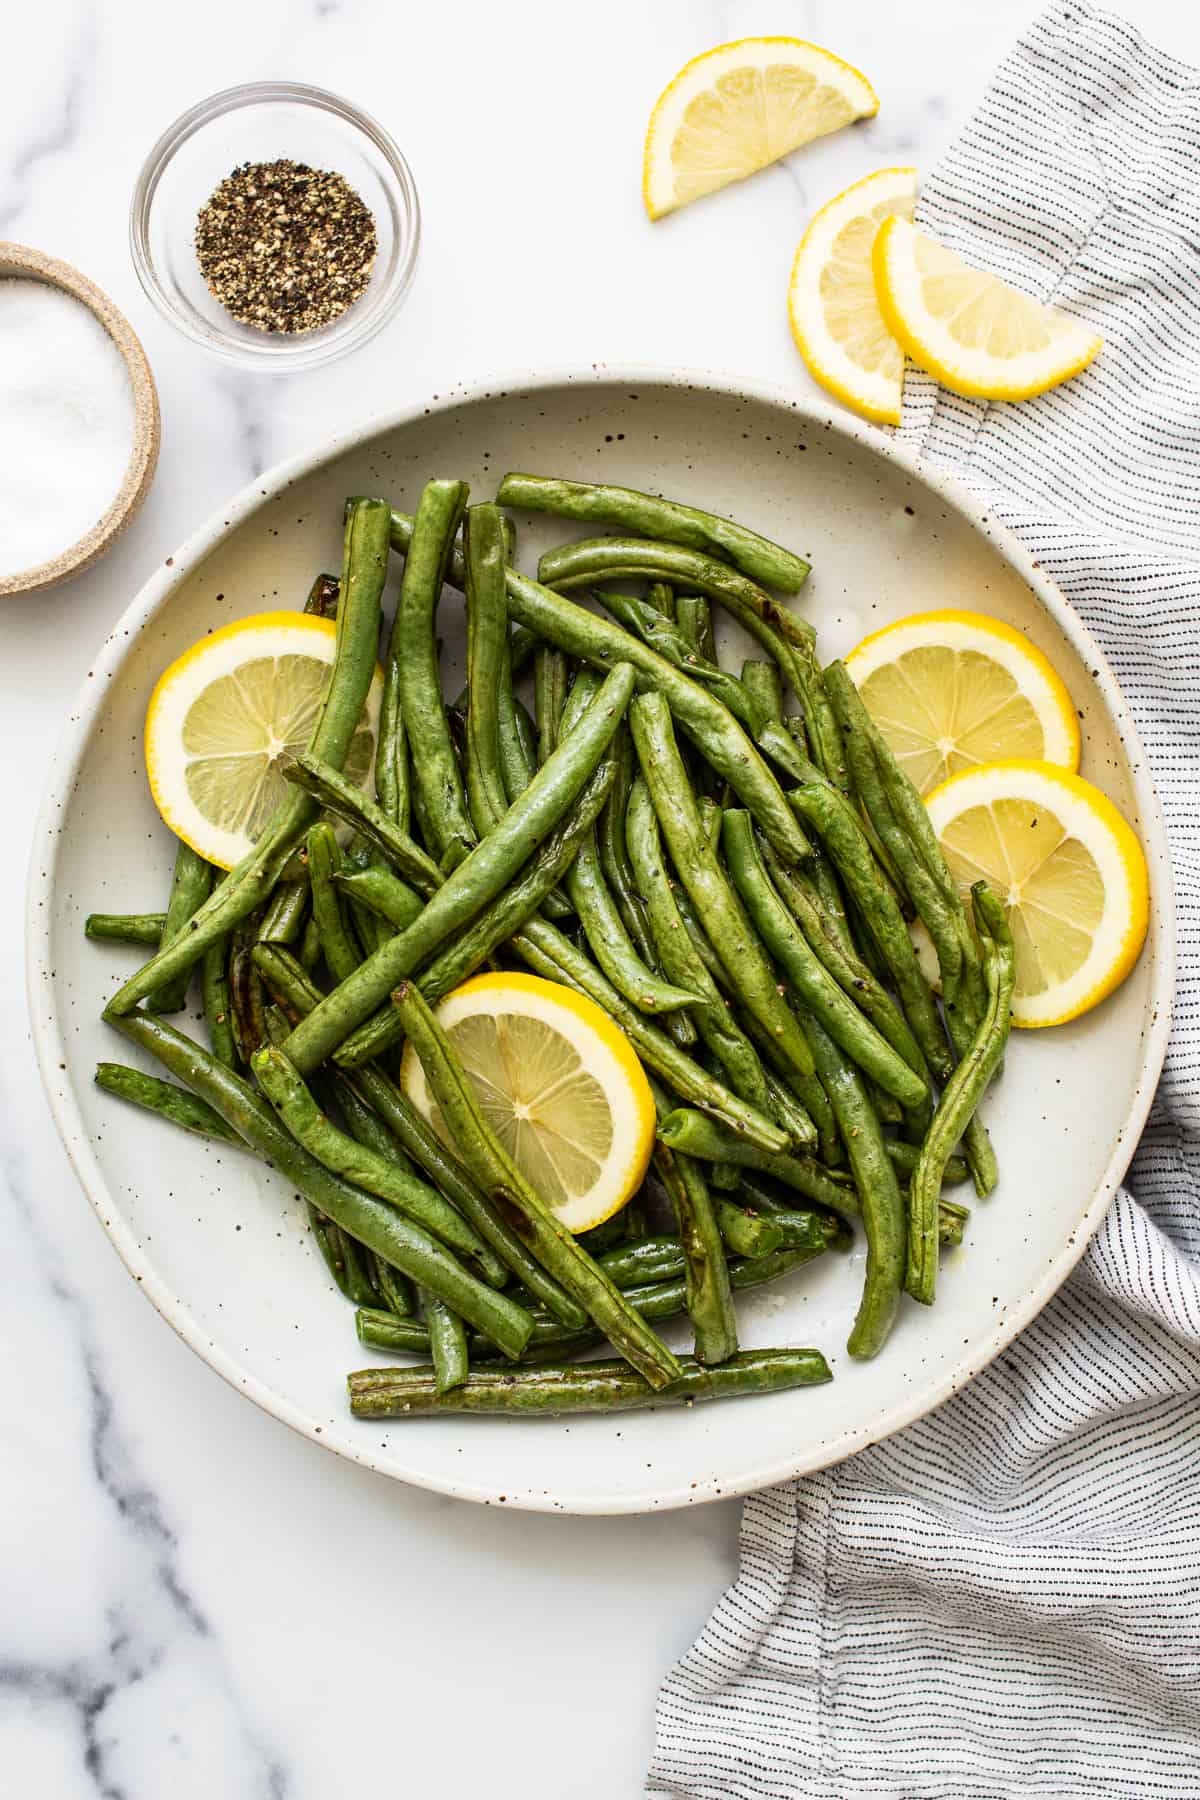 Green beans in a serving bowl with lemon slices TeamJiX